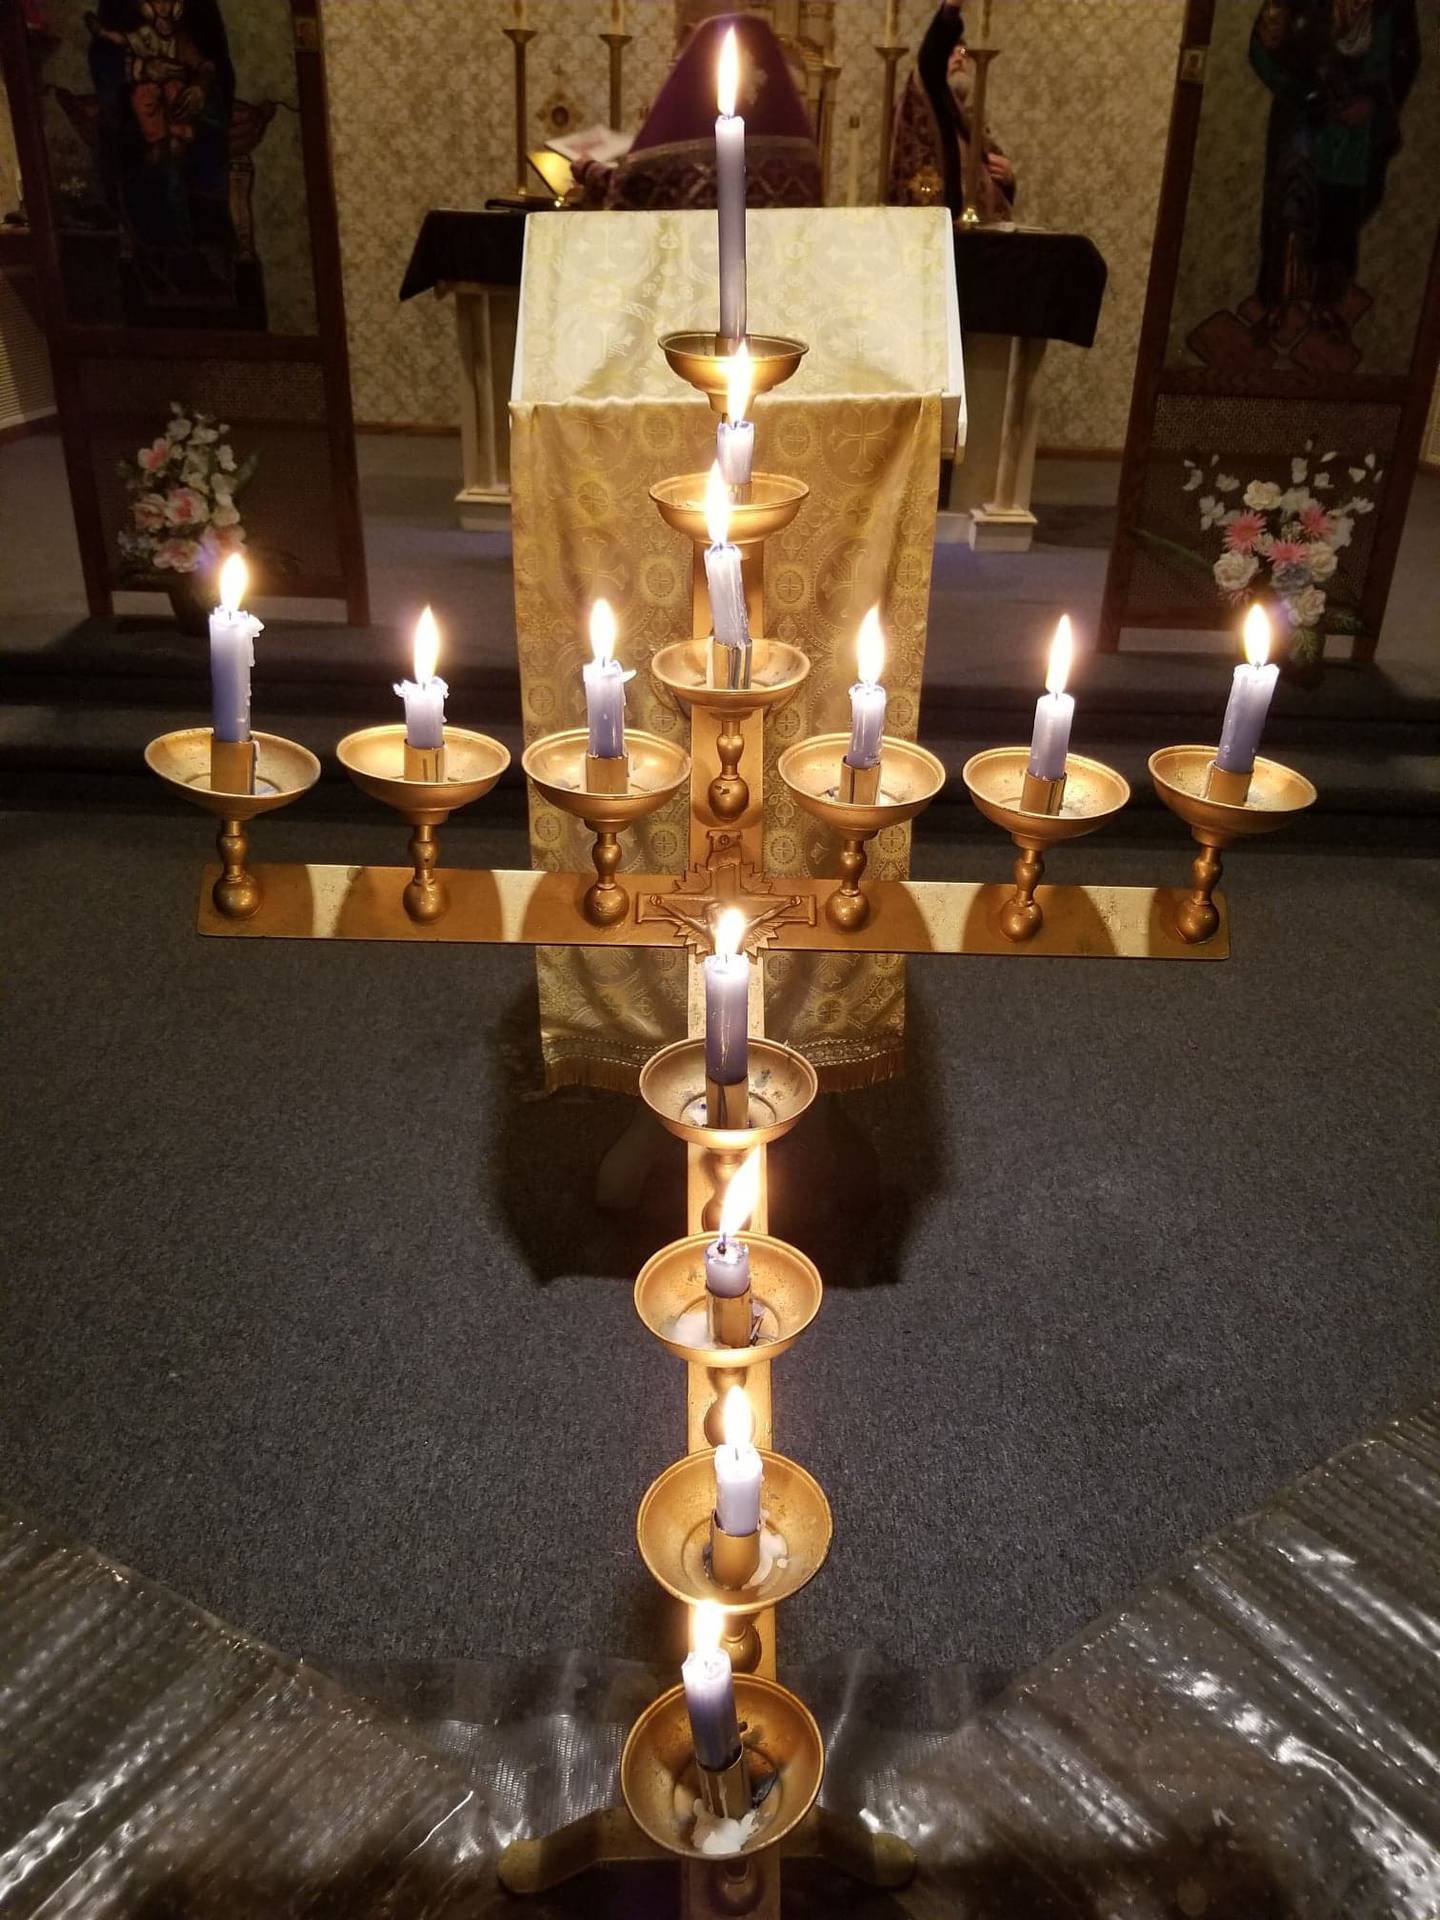 Pictured are candles from resurrection matins during a pre-pandemic year at St. Nicholas Orthodox Church in Homewood, which is under the Ukrainian Orthodox Church – Kyiv Patriarchate.